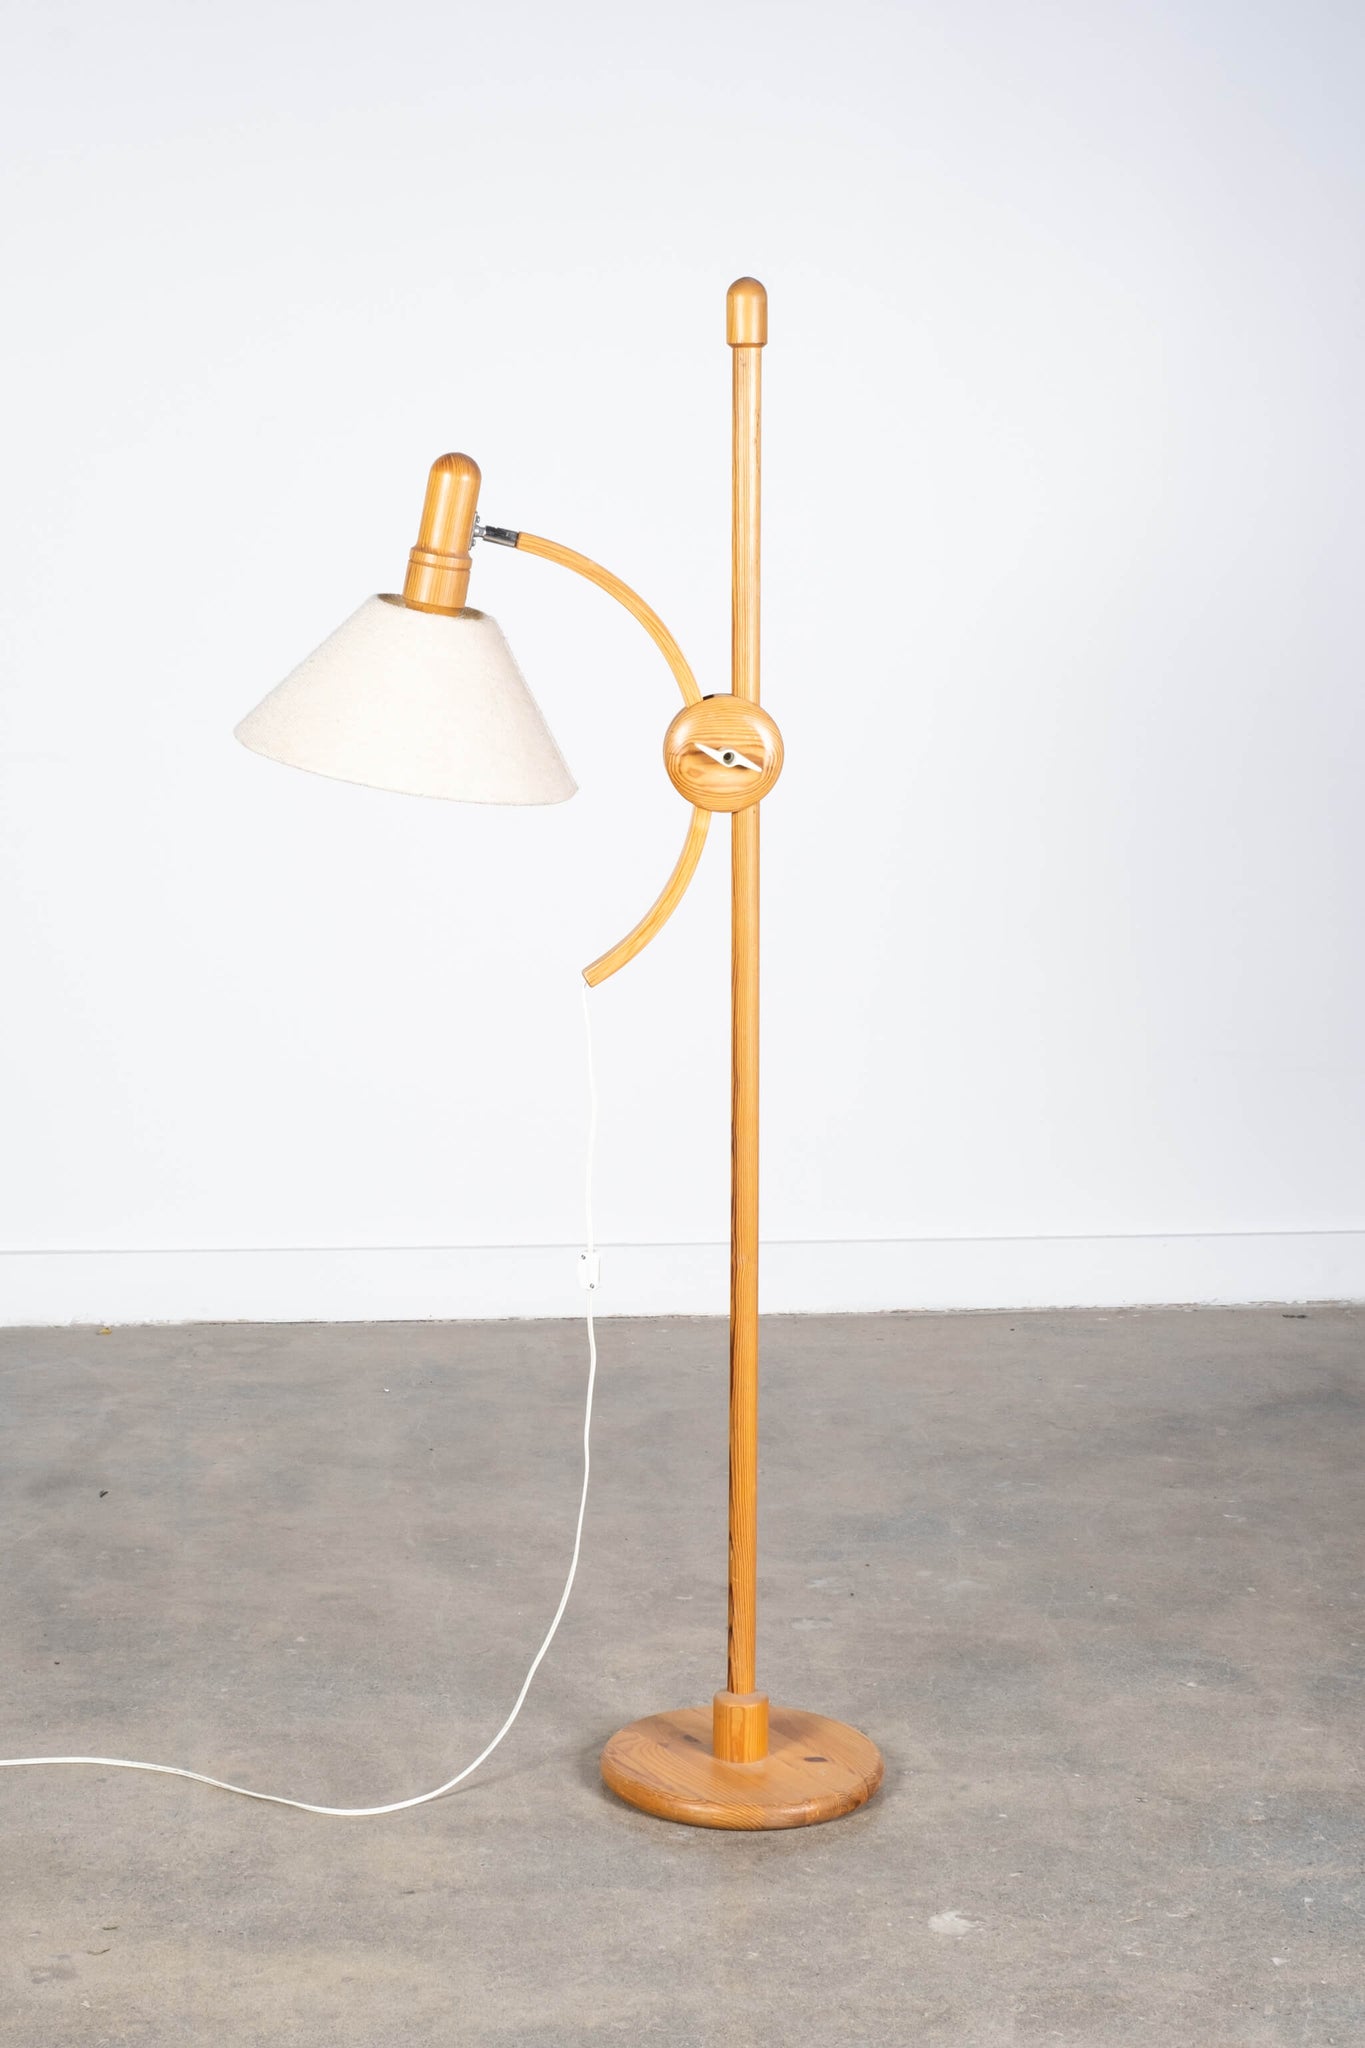 Vintage Arc Pivot Floor Lamp in Pine, side view with a lowered lamp